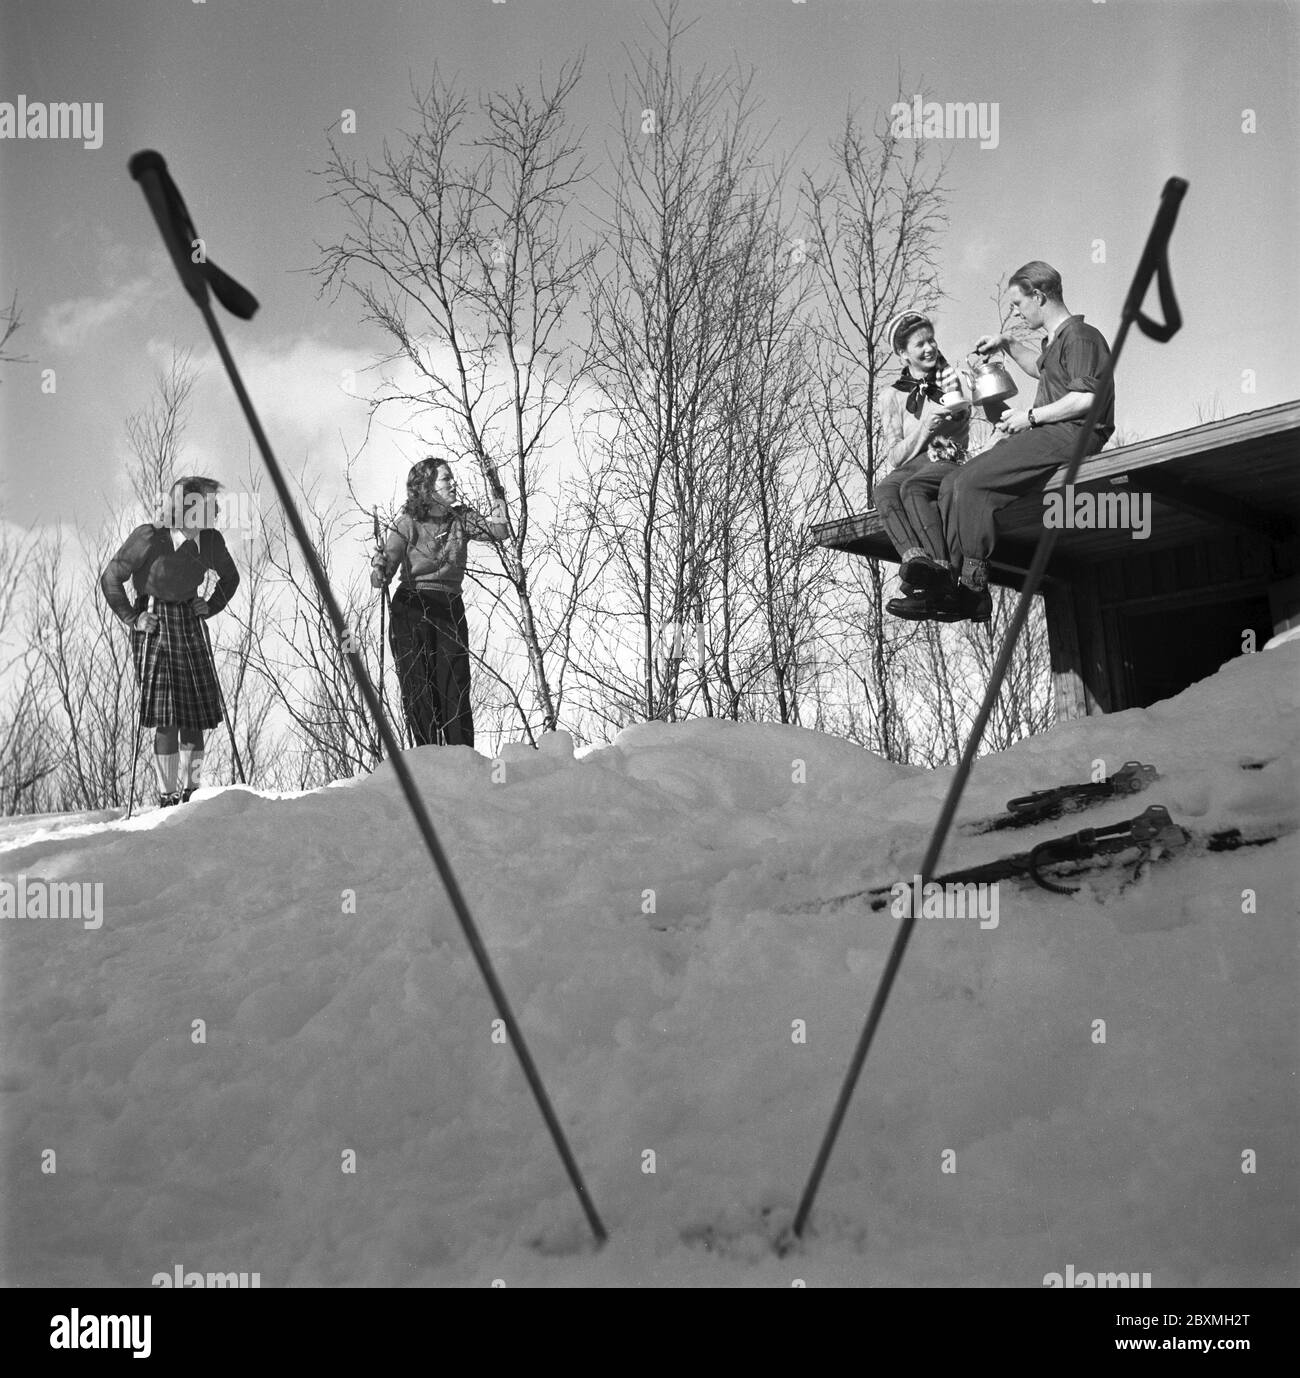 Winter in the 1940s. A young couple is having a cup of coffee while sitting on the roof of their cottage. Their two friends are standing on skis and chatting. The picture is taken in Swedish Lapland near Björkliden. It's Mr and Mrs Iris and Bertil Thorelli having a nice time in the Swedish wilderness.   Sweden 1943 Photo Kristoffersson Ref D115-1 Stock Photo